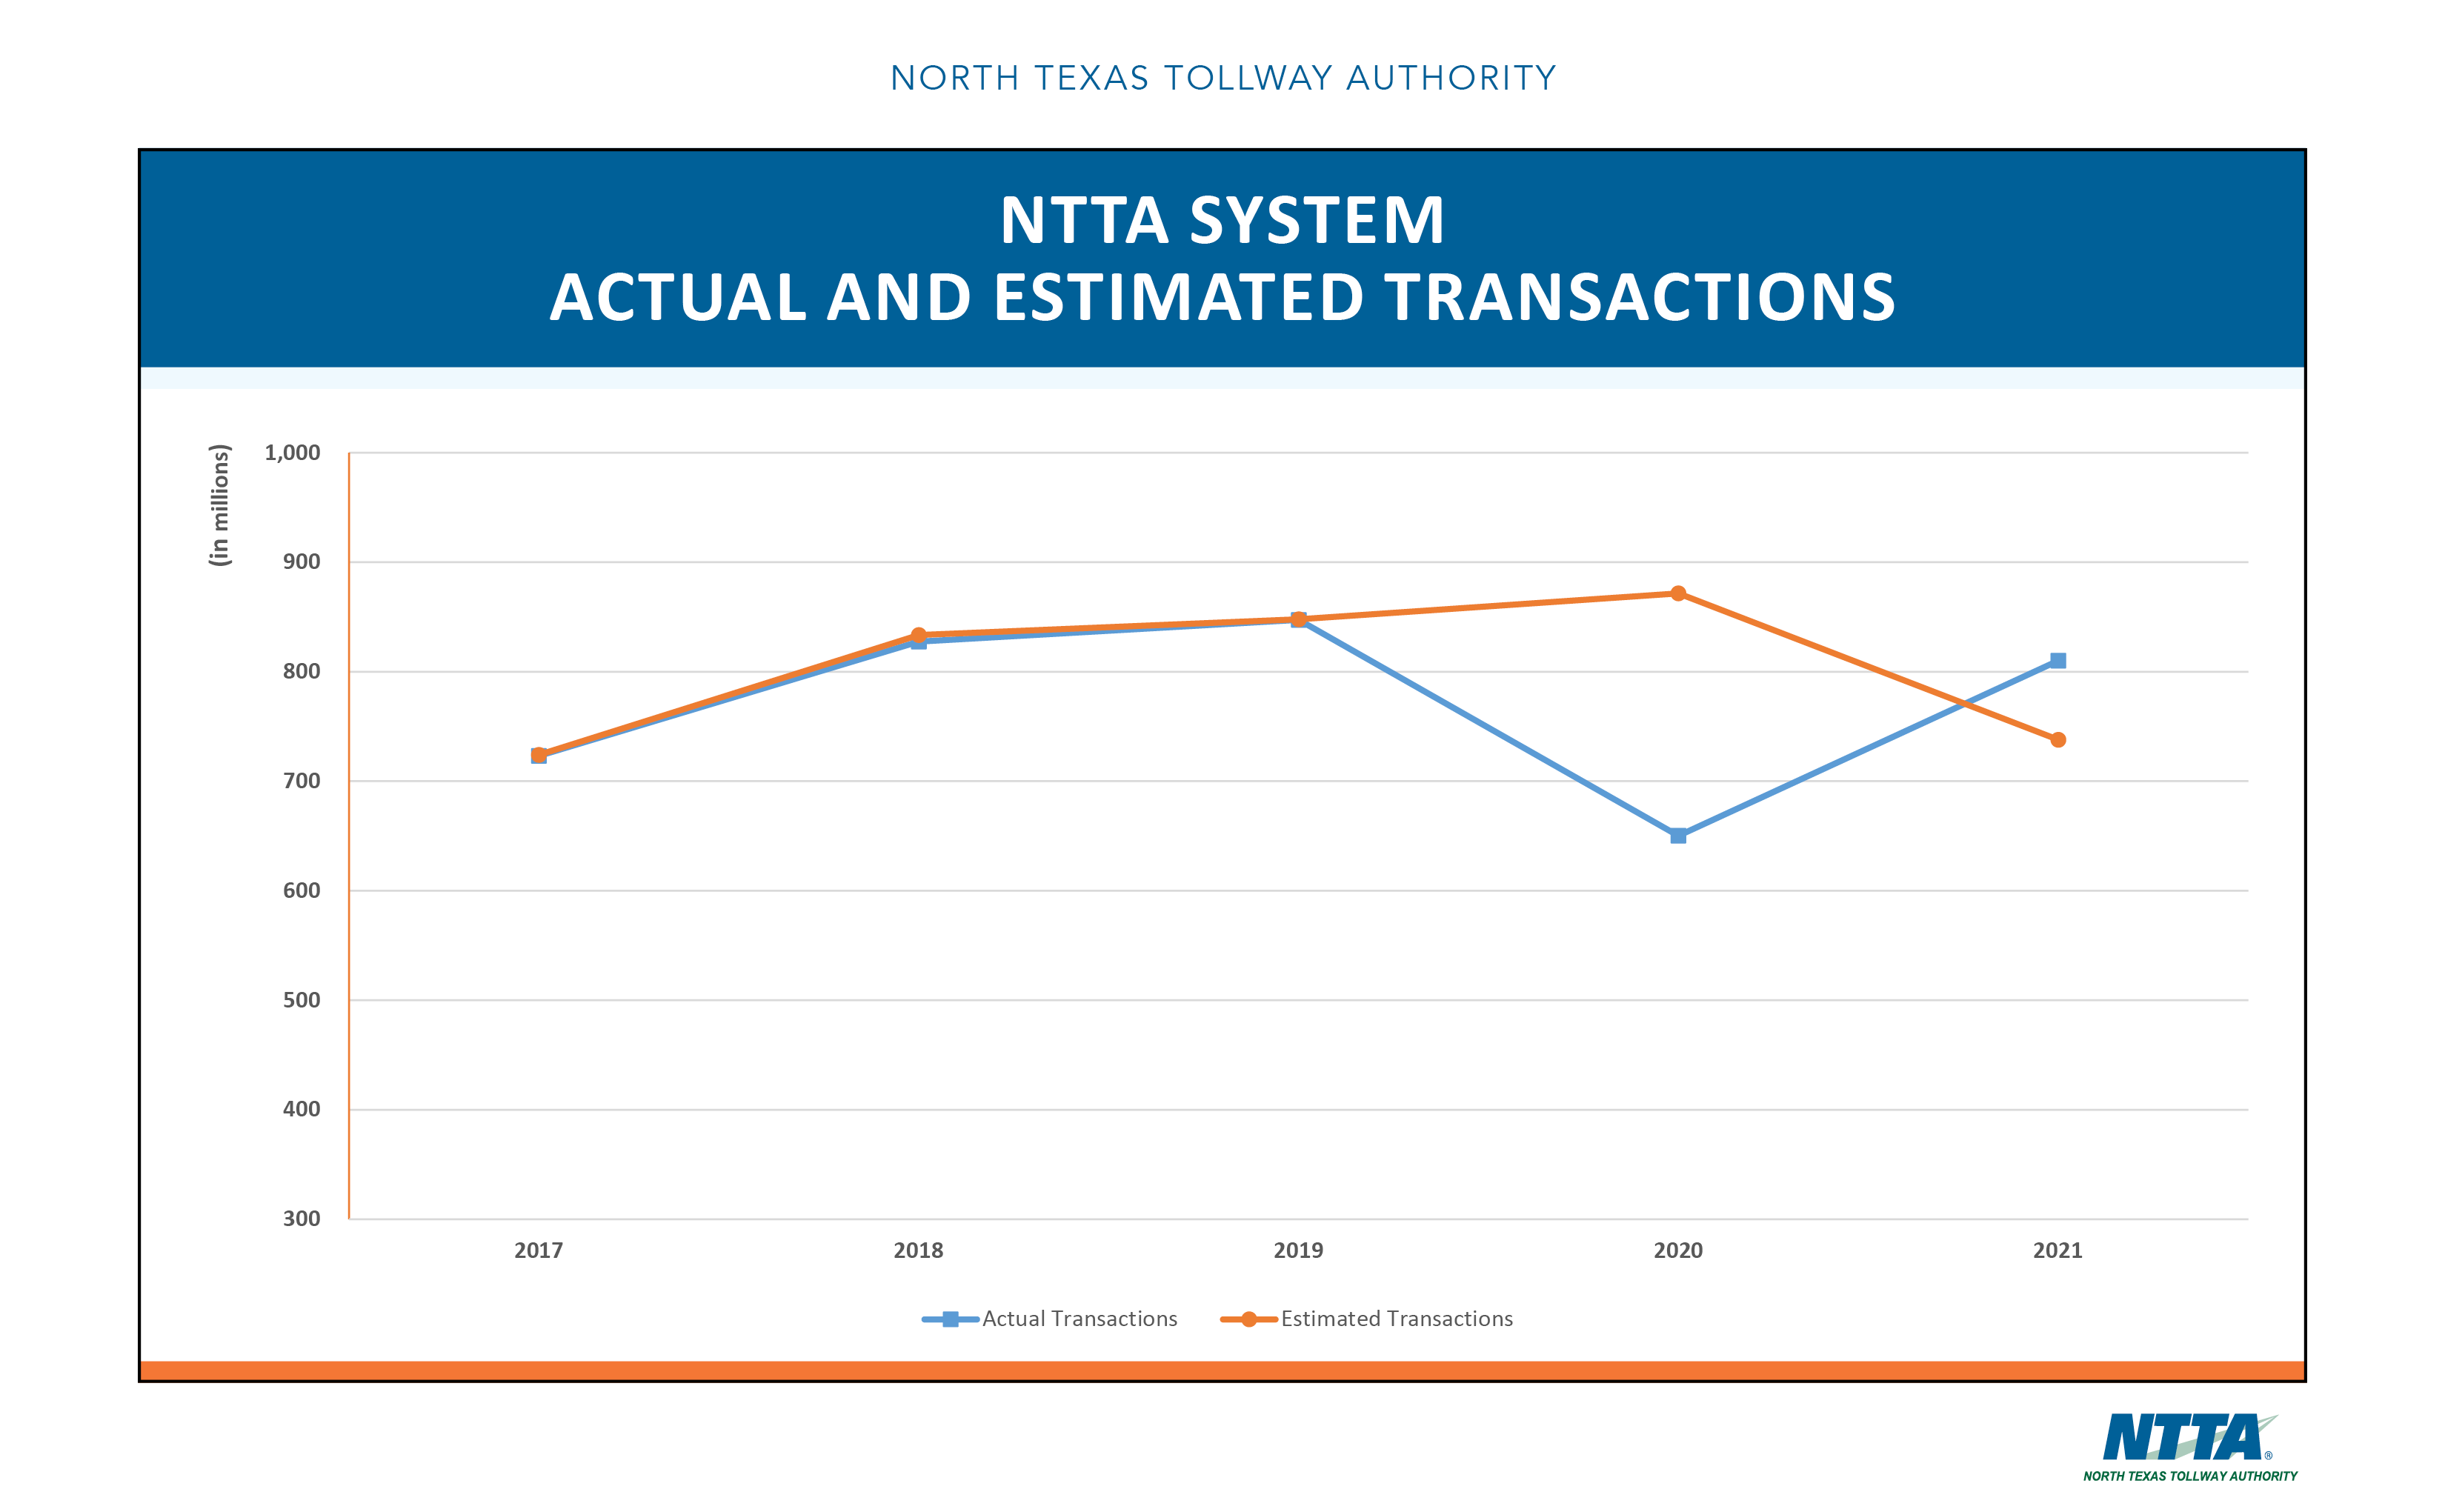 Actual and Estimated Transactions